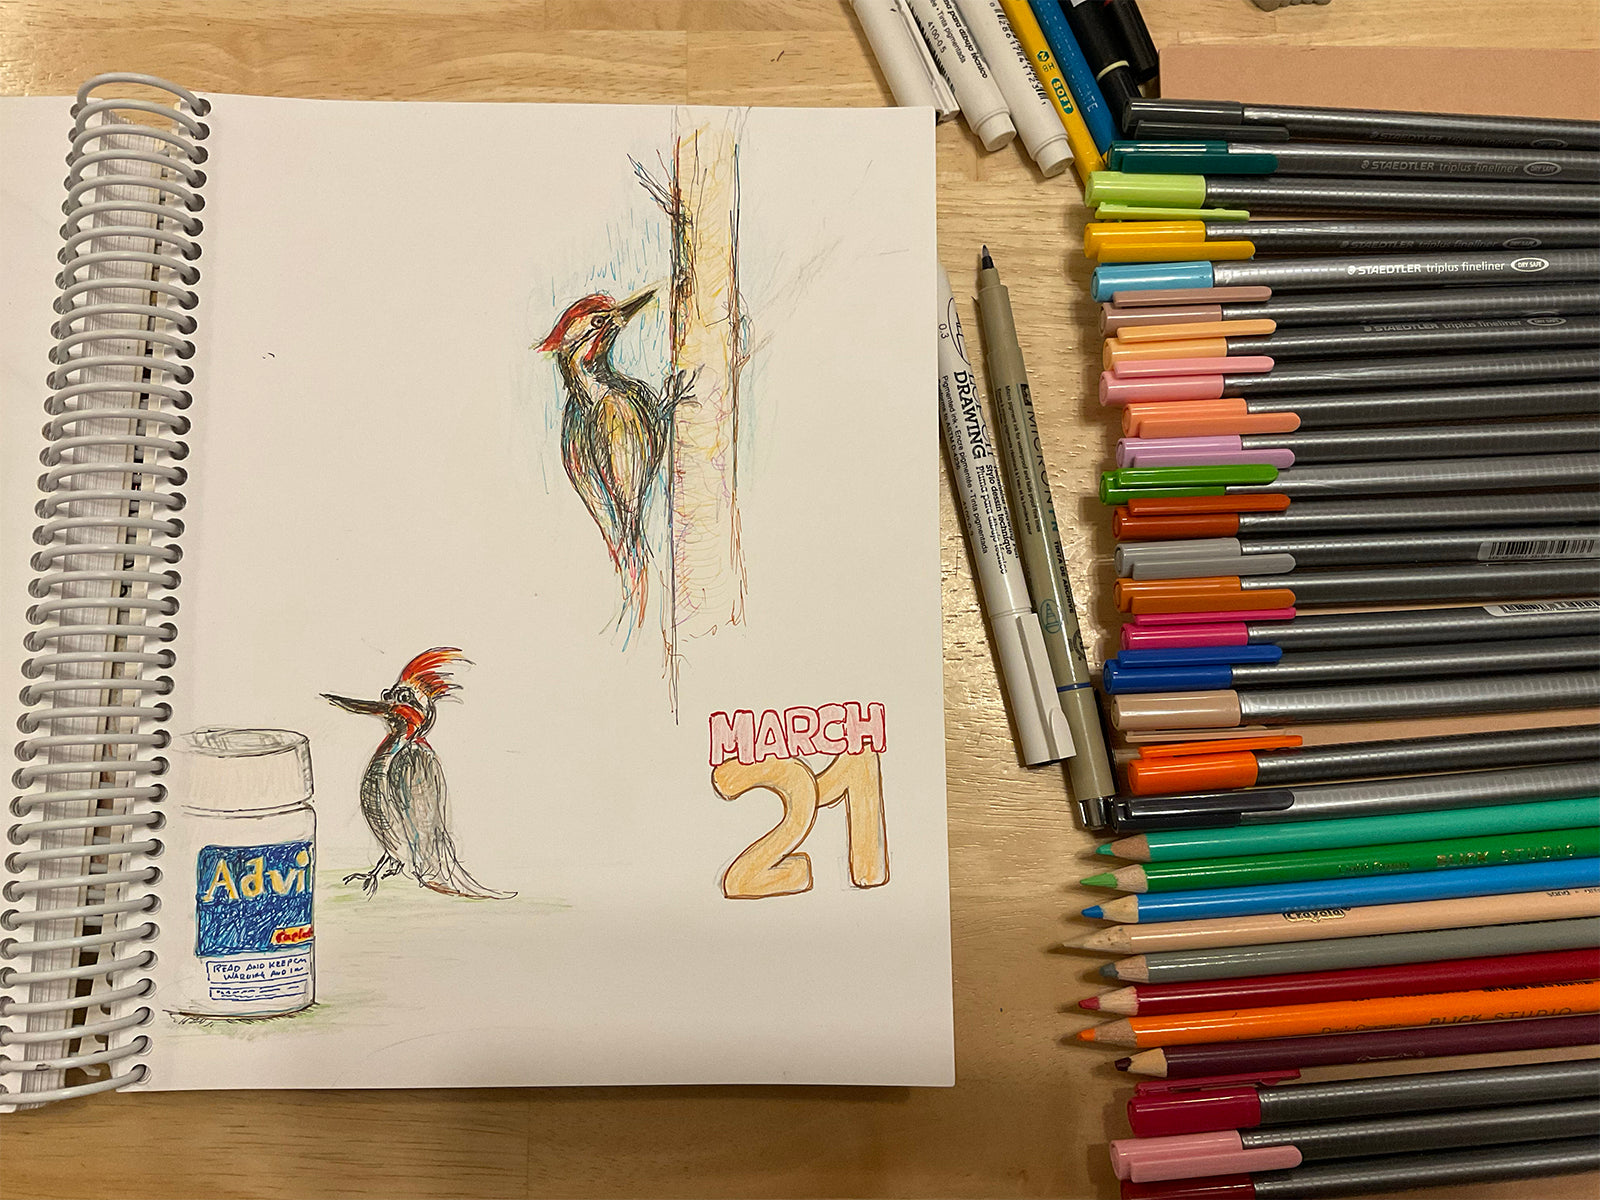 My daily doodle book, daily doodling, woodpecker drawing, advil drawing, doodling